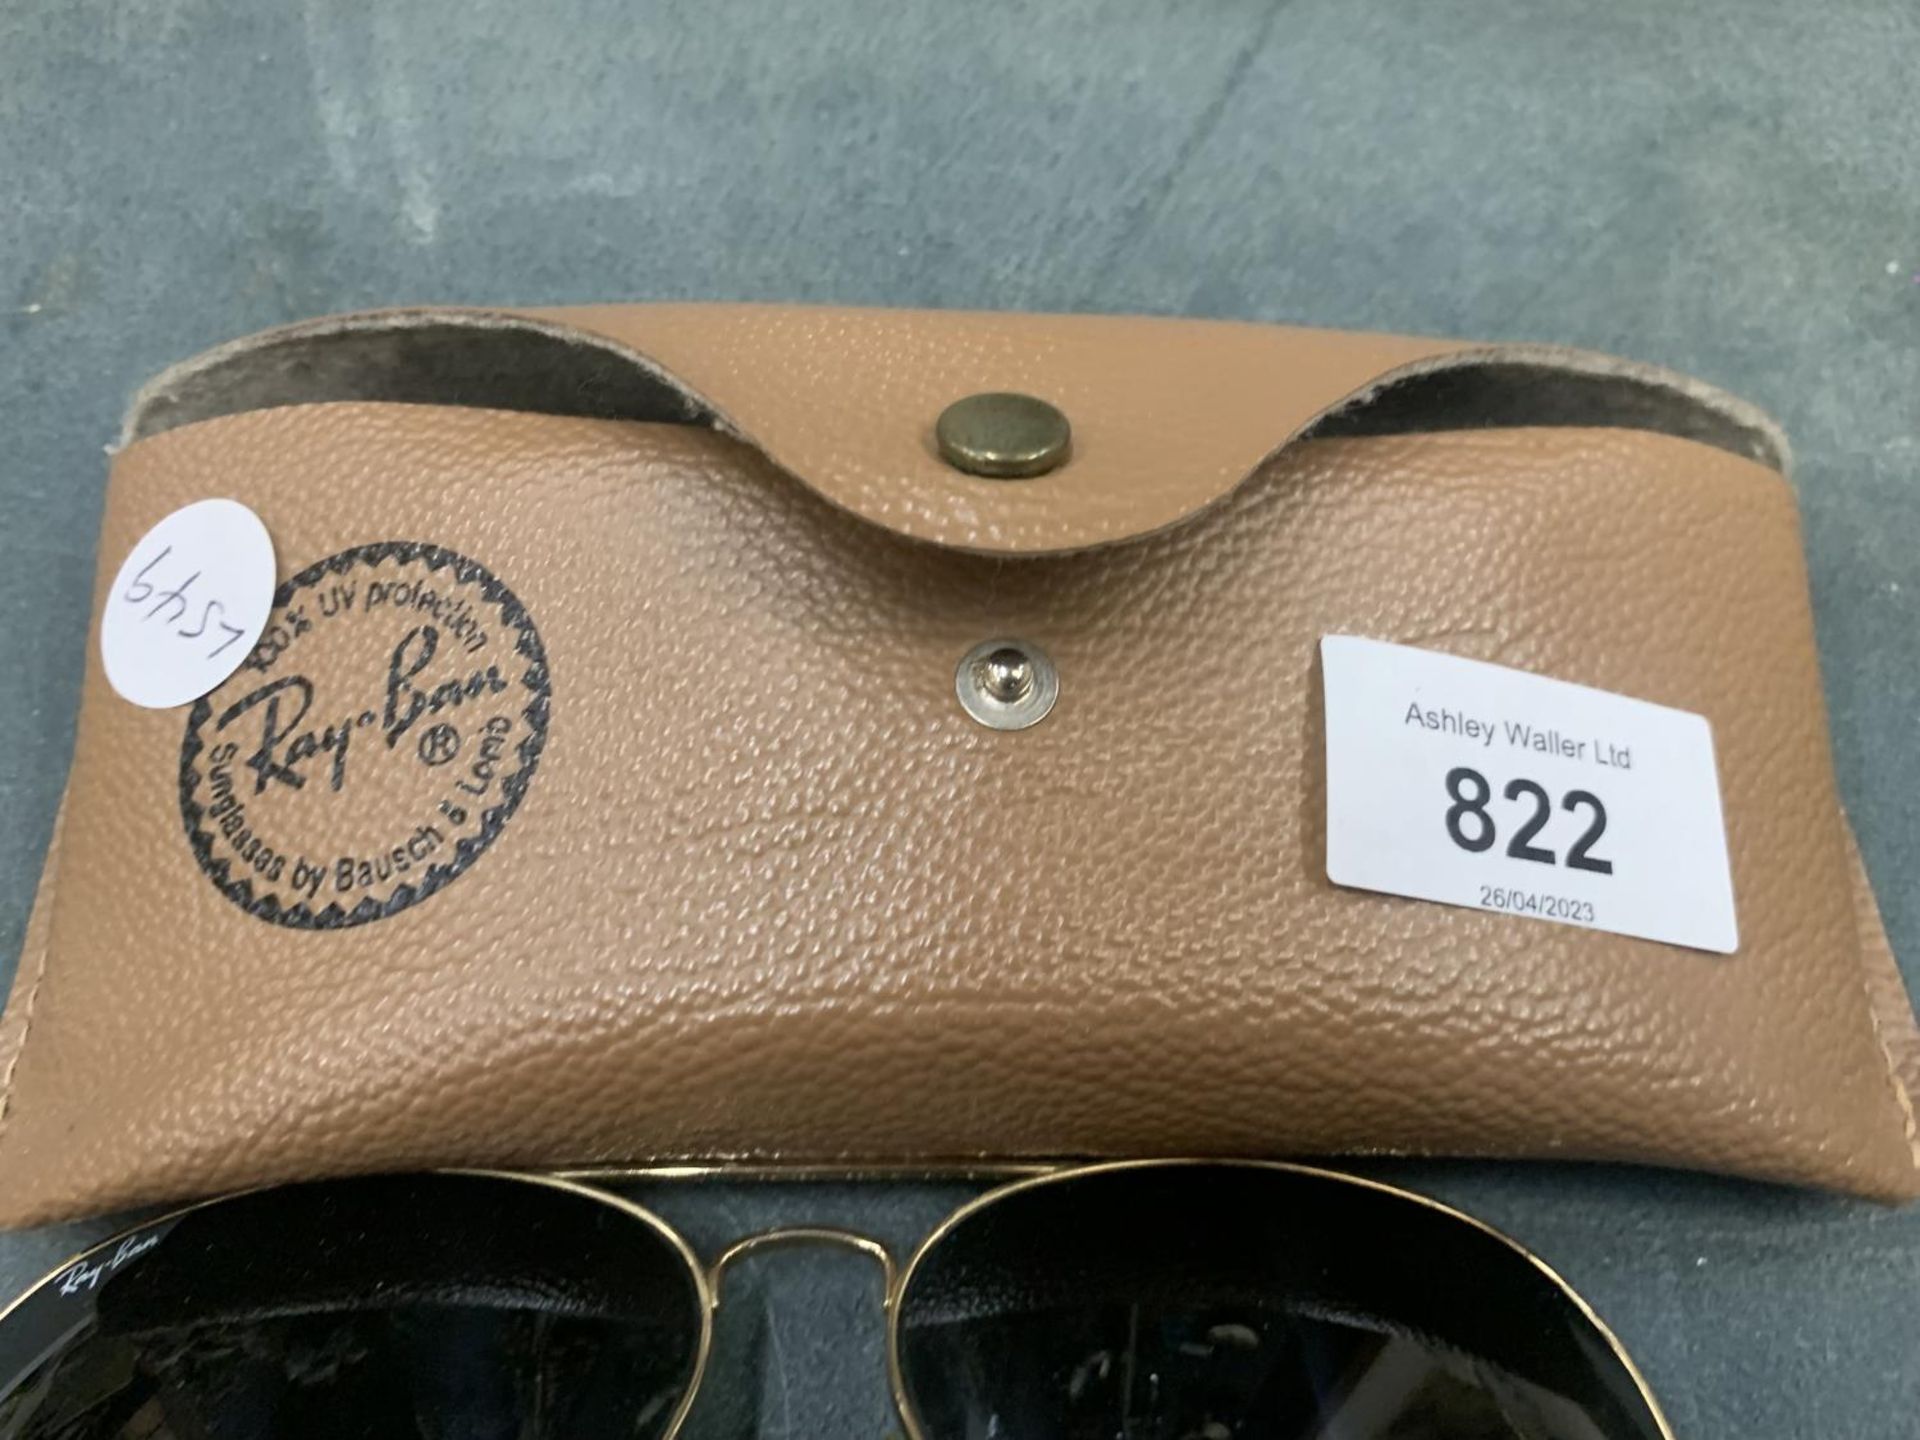 A PAIR OF SUNGLASSES MARKED 'RAY-BAN' IN A CASE - Image 2 of 3